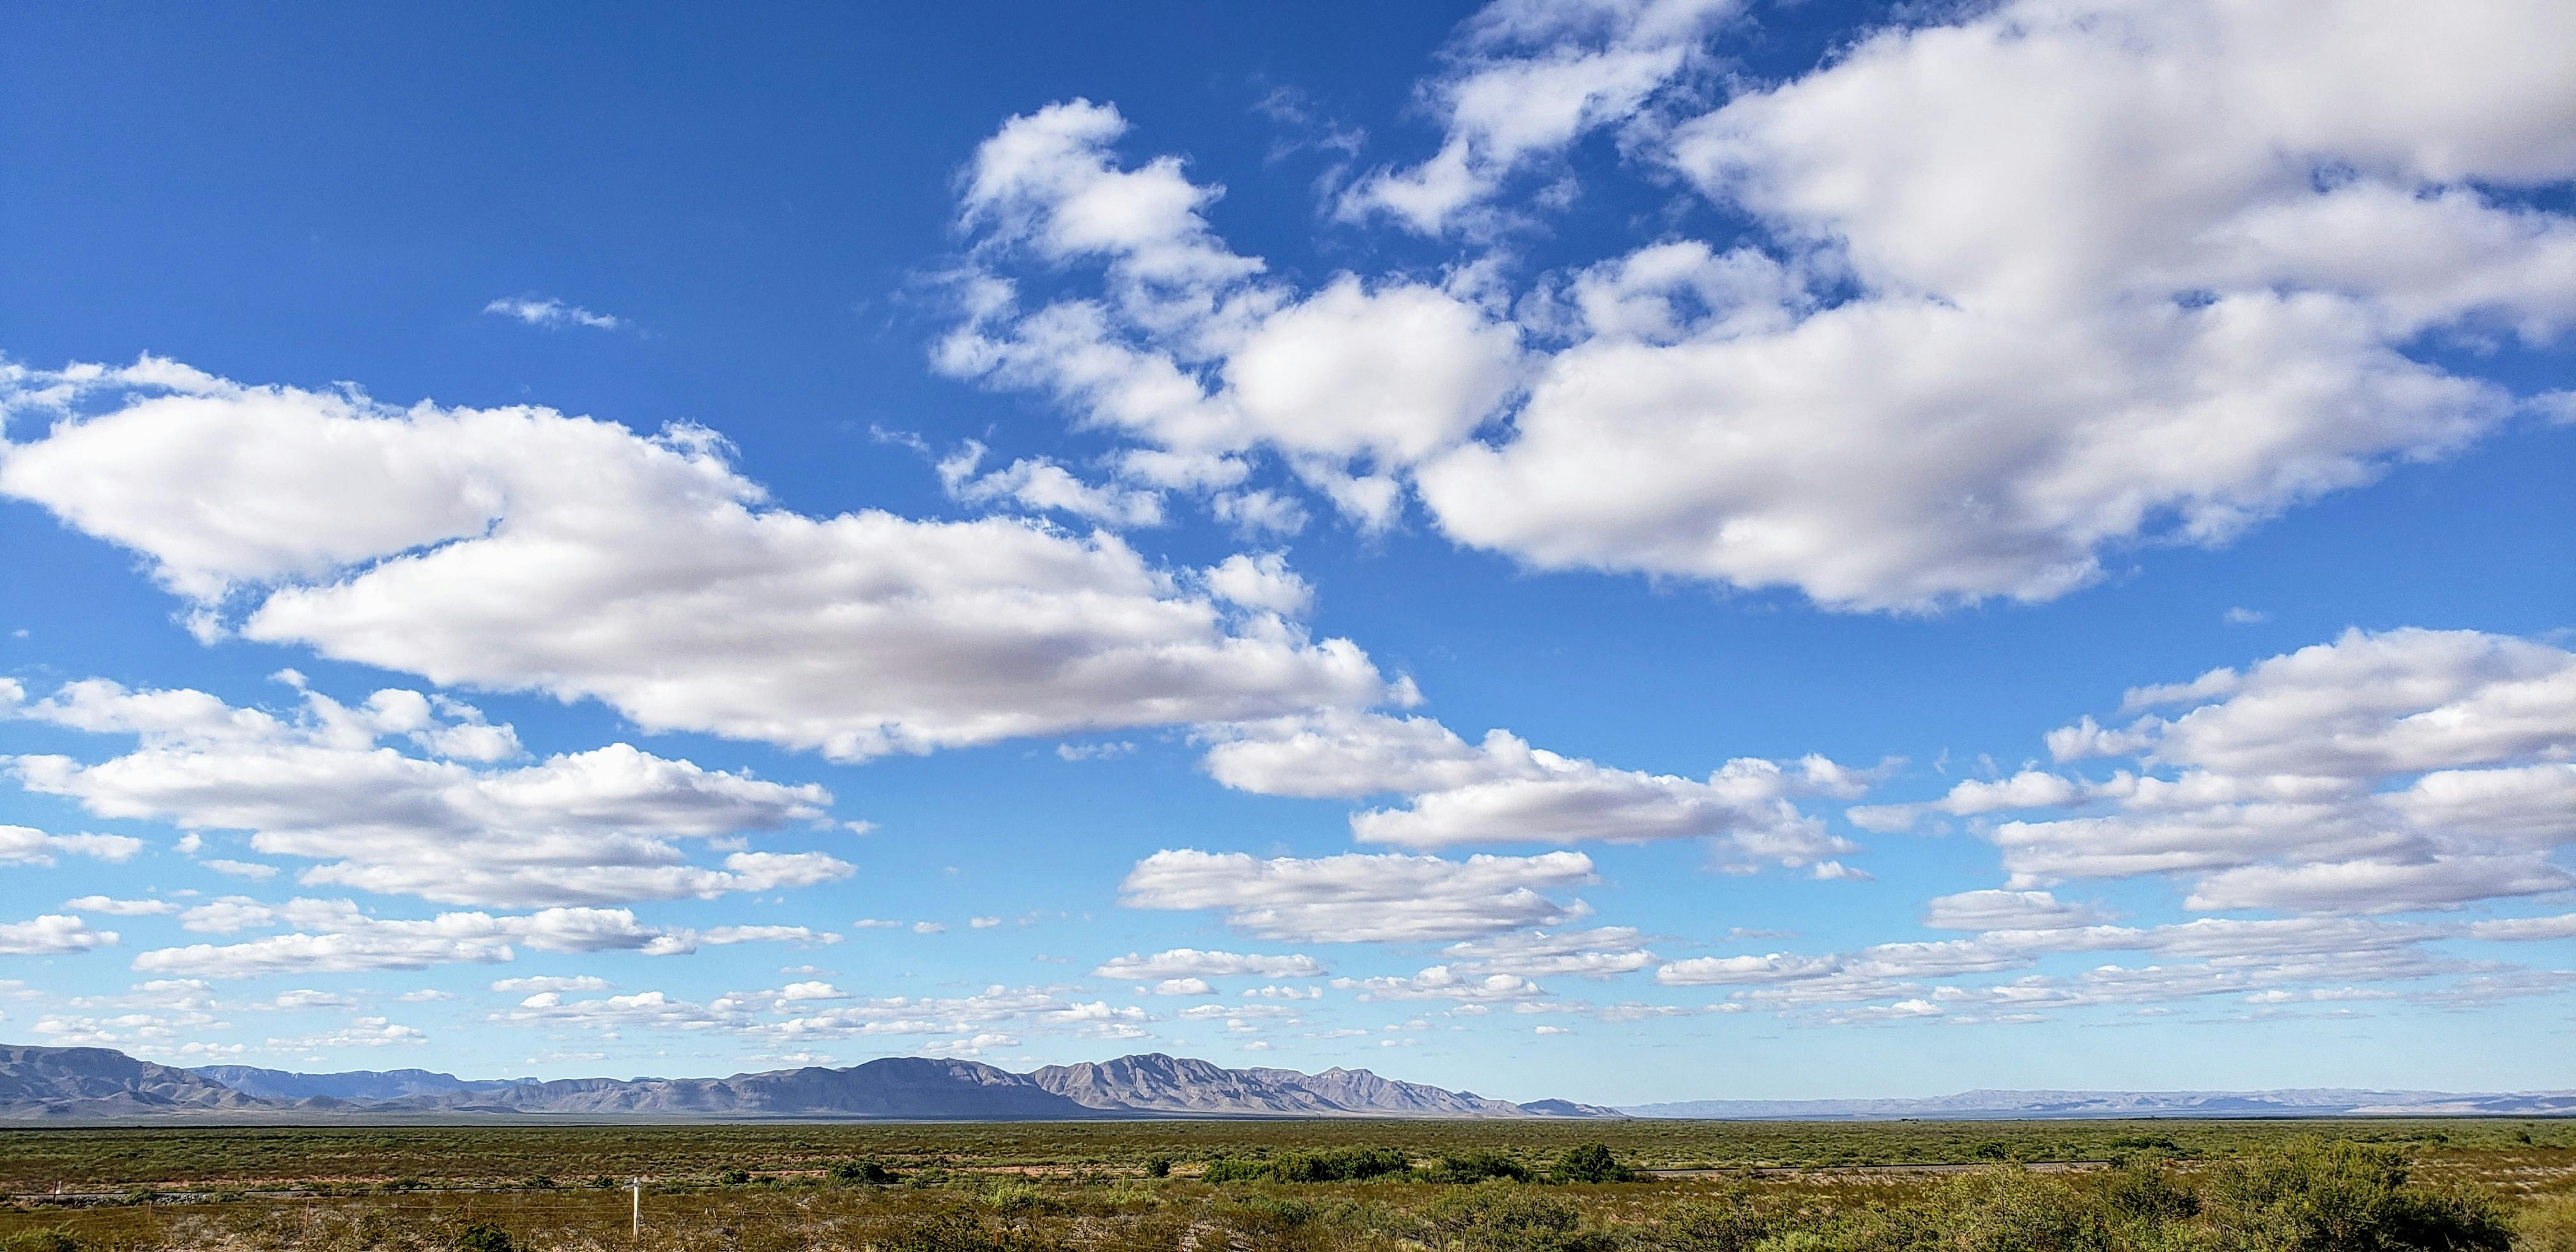 Free stock photo of mountain sky blue clouds desert